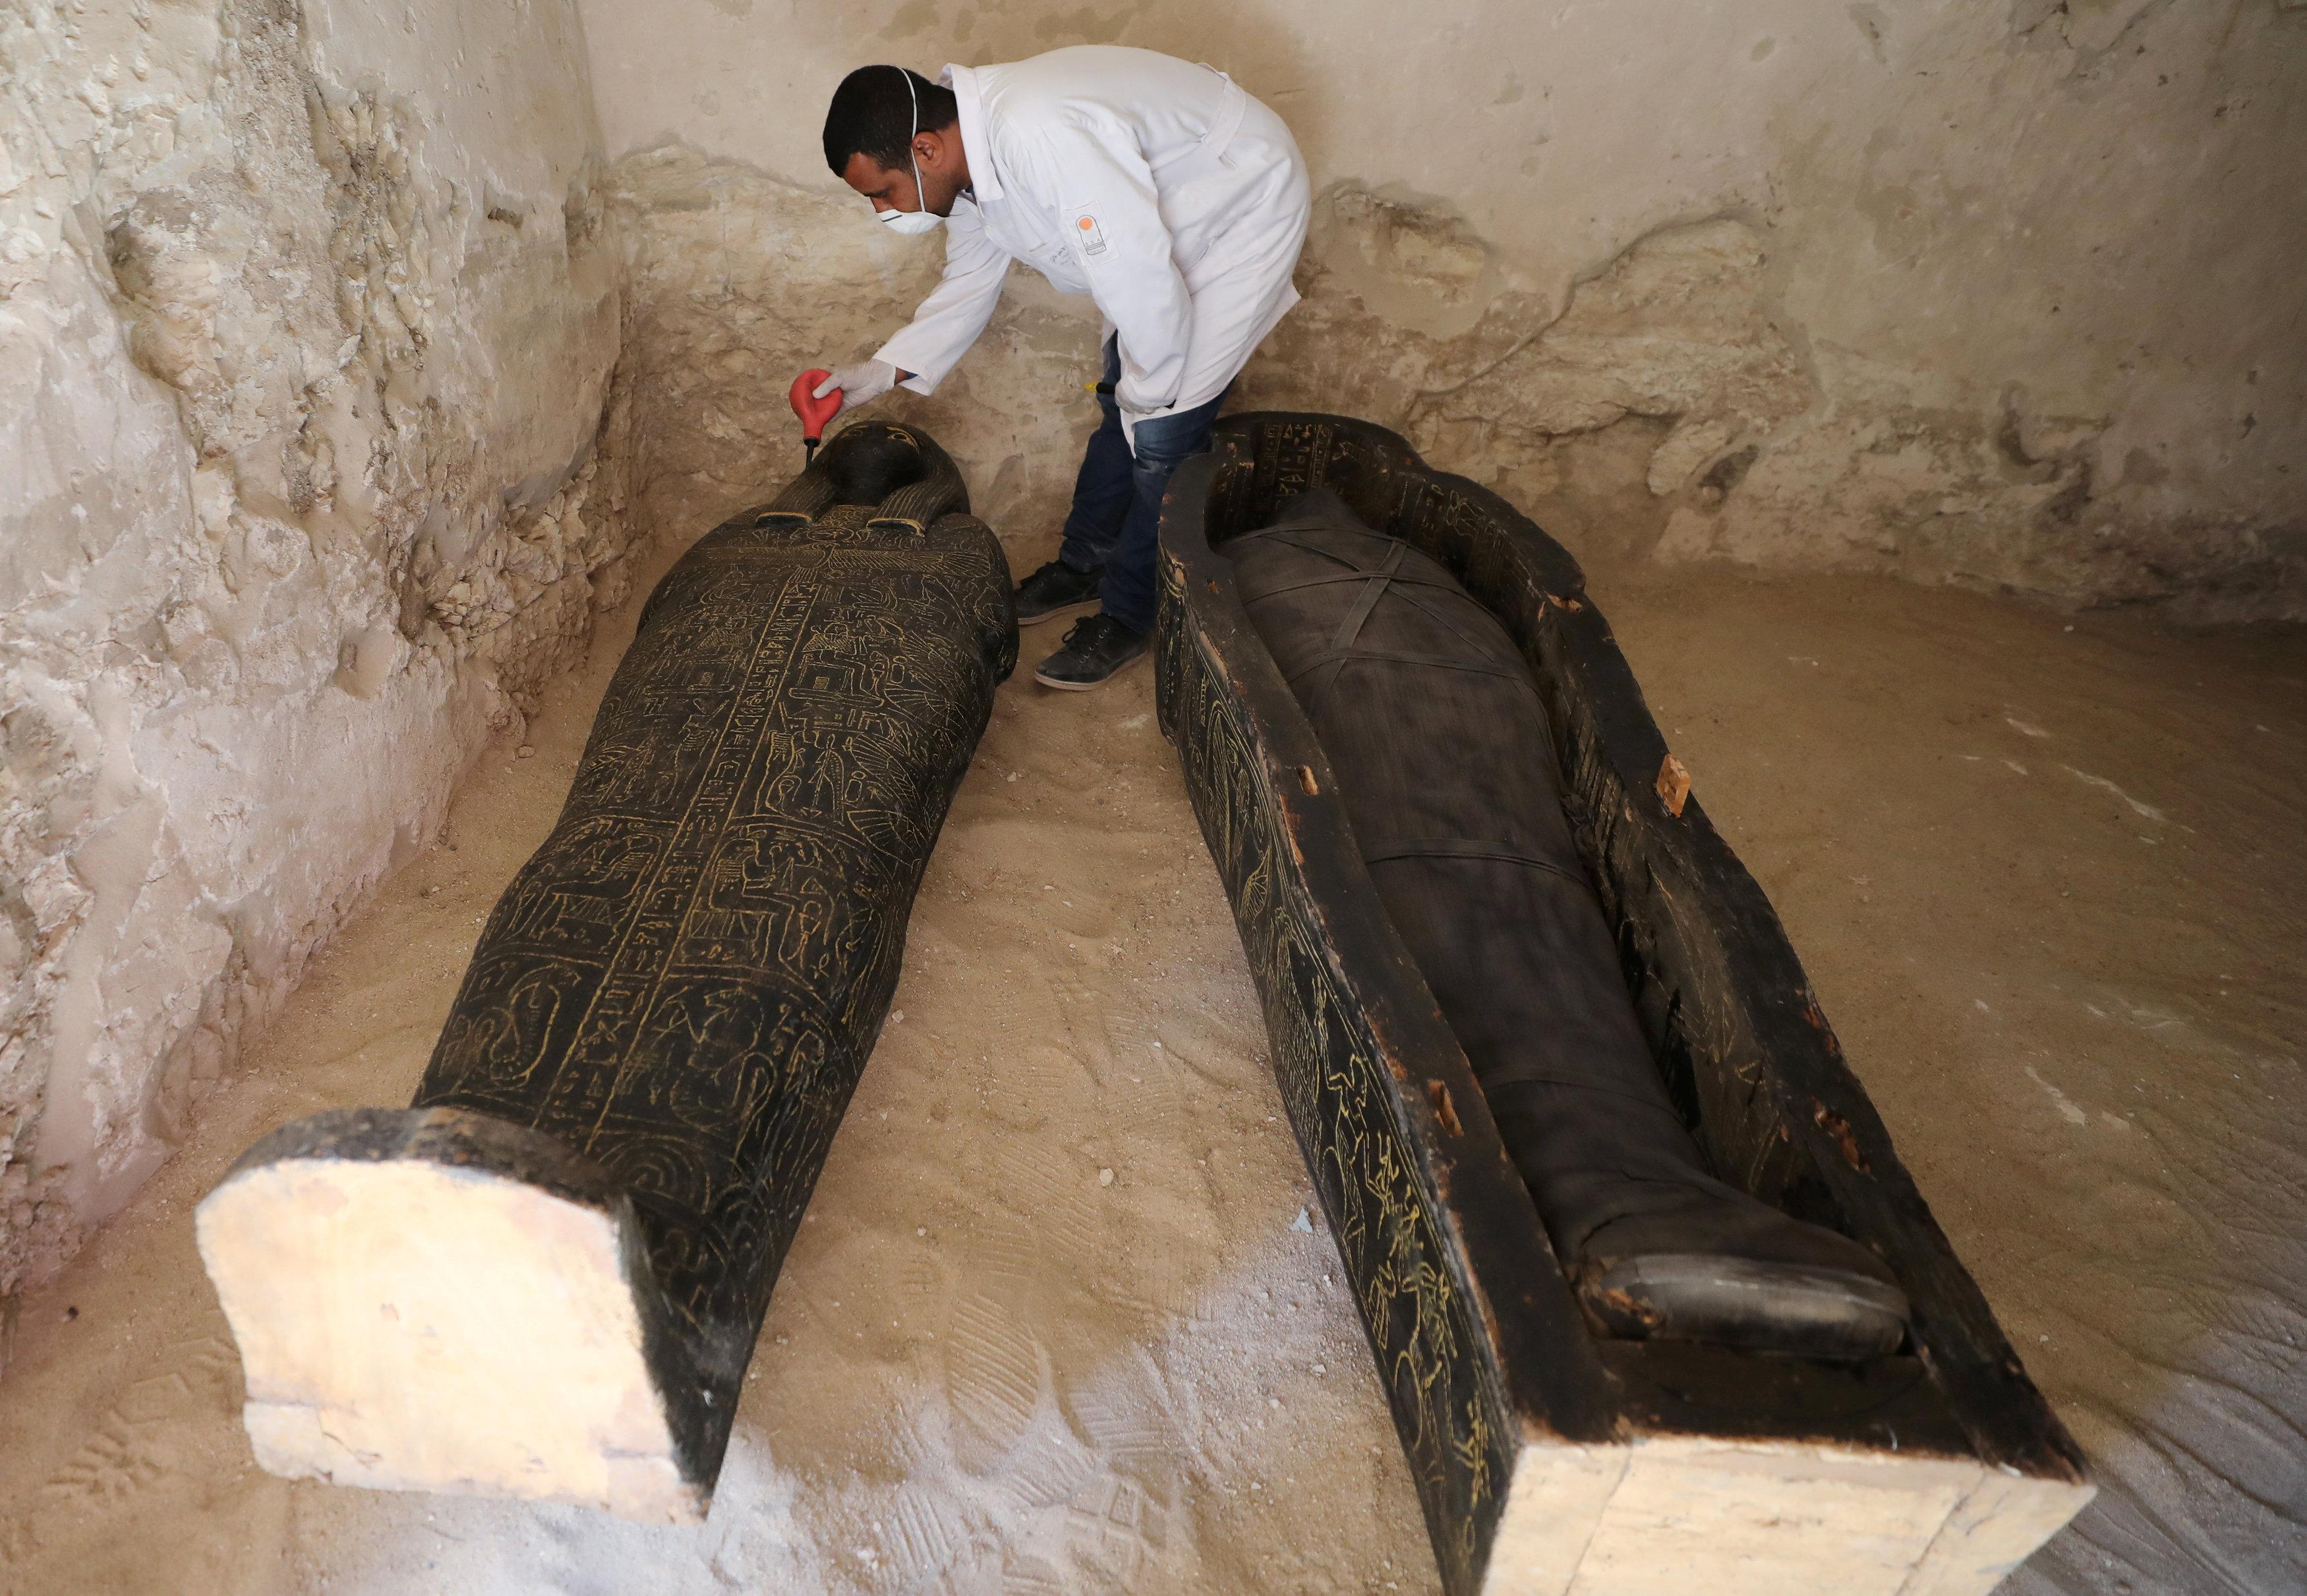 MUMMY-MAKER'S TOMB Ancient Egyptian coffin opened for first time in 3,000 years to reveal mummy of priest who oversaw embalming of pharaohs - T-News